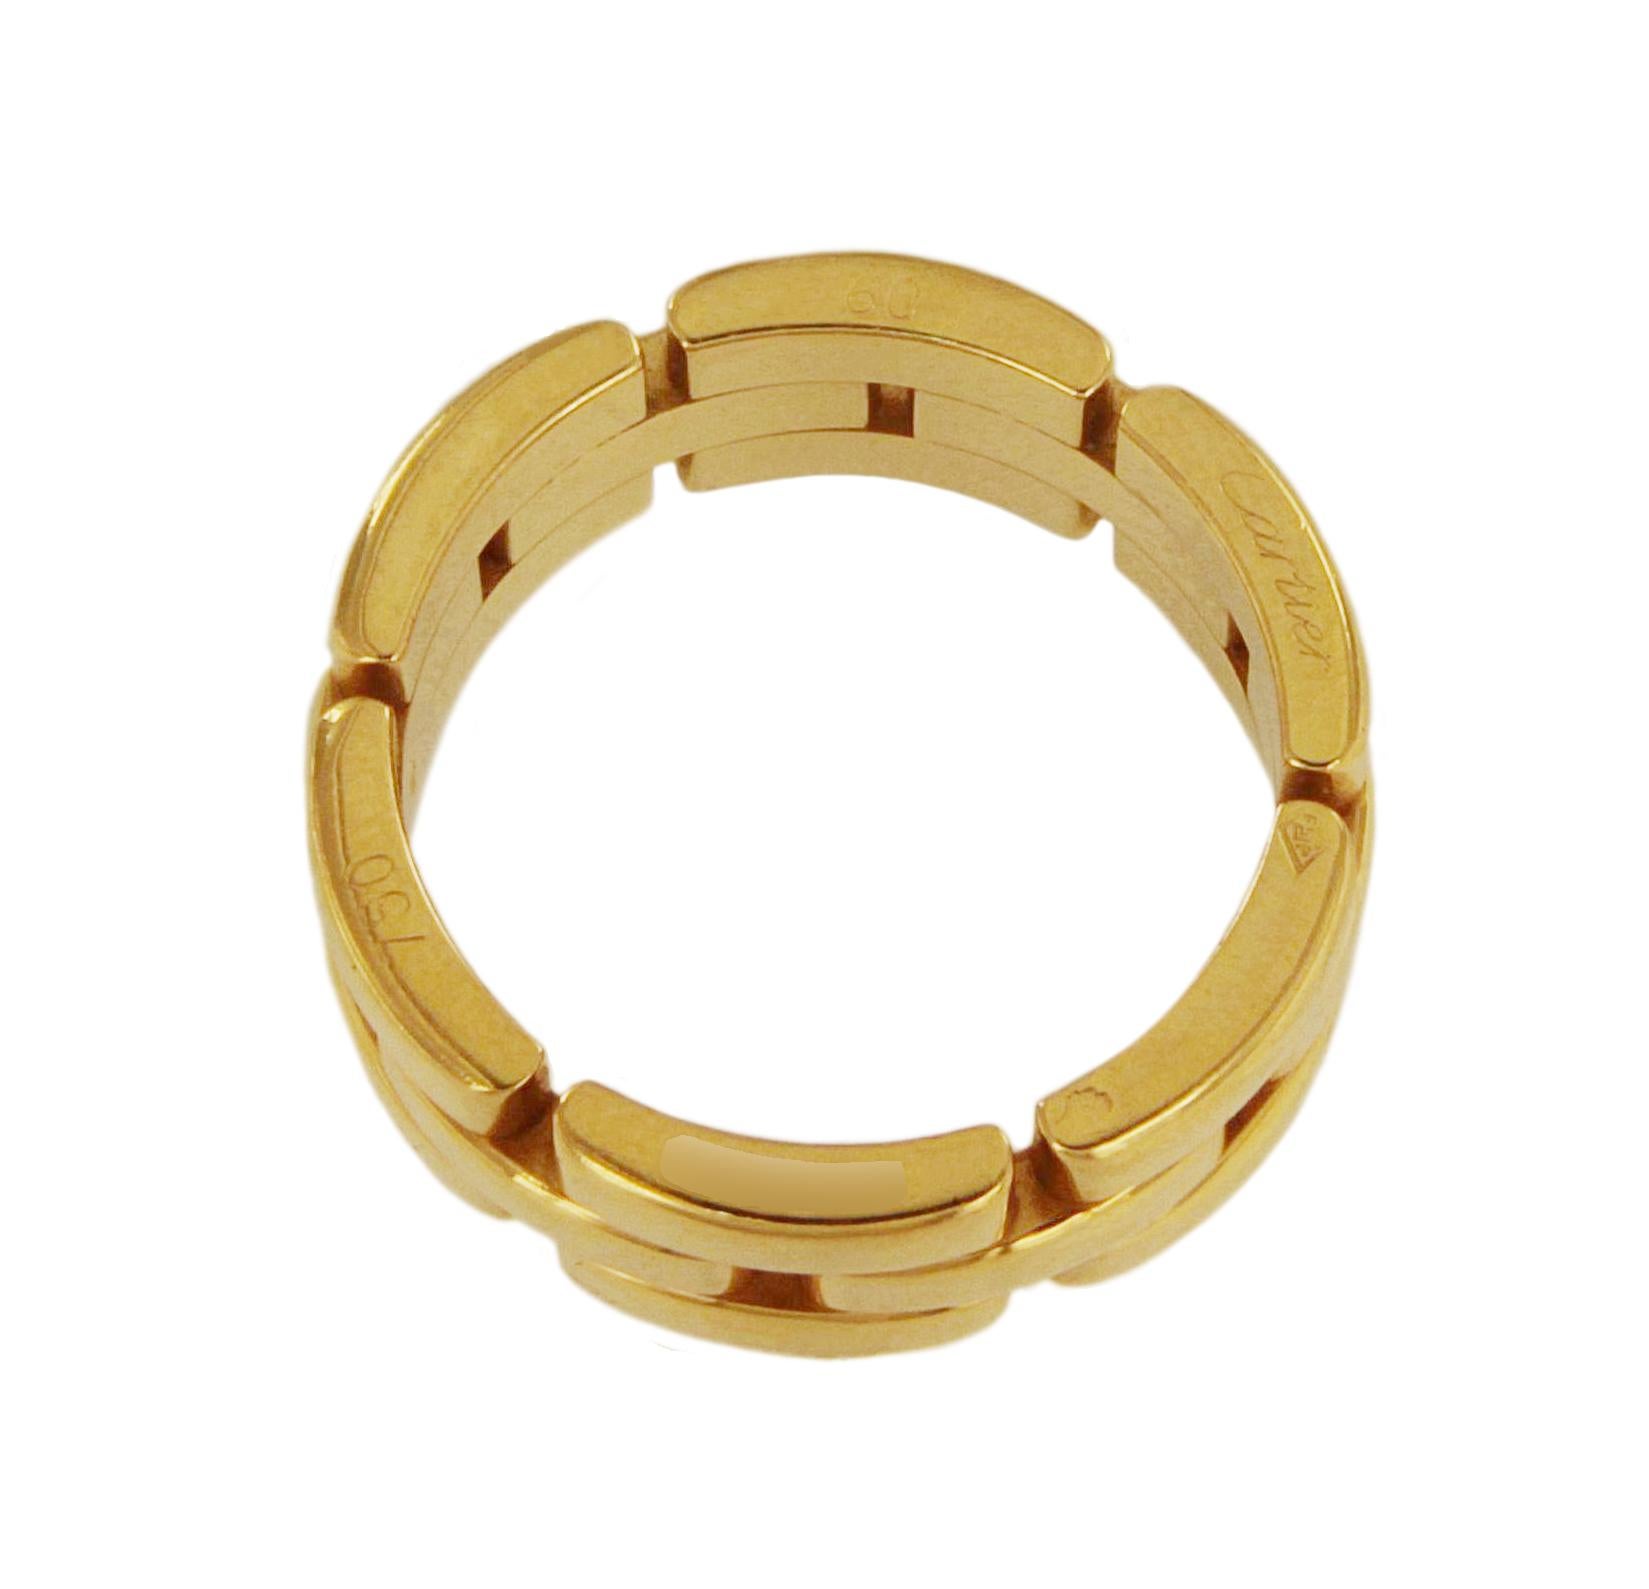 CARTIER MAILLON PANTHERE 18 KARAT YELLOW GOLD RING SIZE 60

Condition: Mint 
Material: 18k Yellow Gold
Ring Size: 60/9
Ring Width: 8mm
Ring Weight: 15gr
*Comes with Cartier Box.